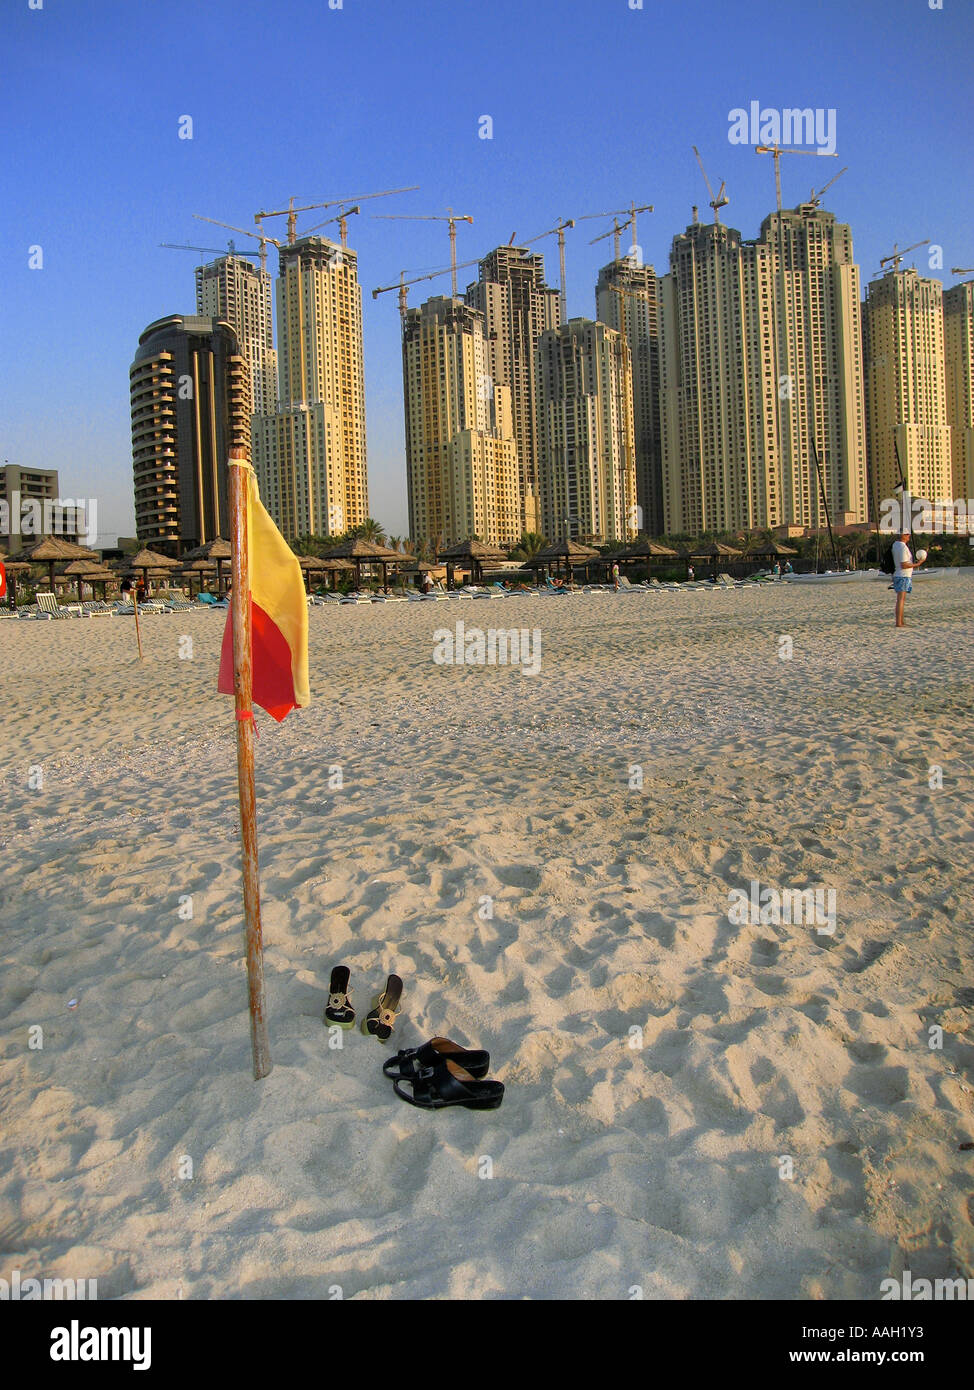 Construction of new high rise buildings in Jumeirah, Dubai, United Arab Emirates with beach in foreground with shoes Stock Photo